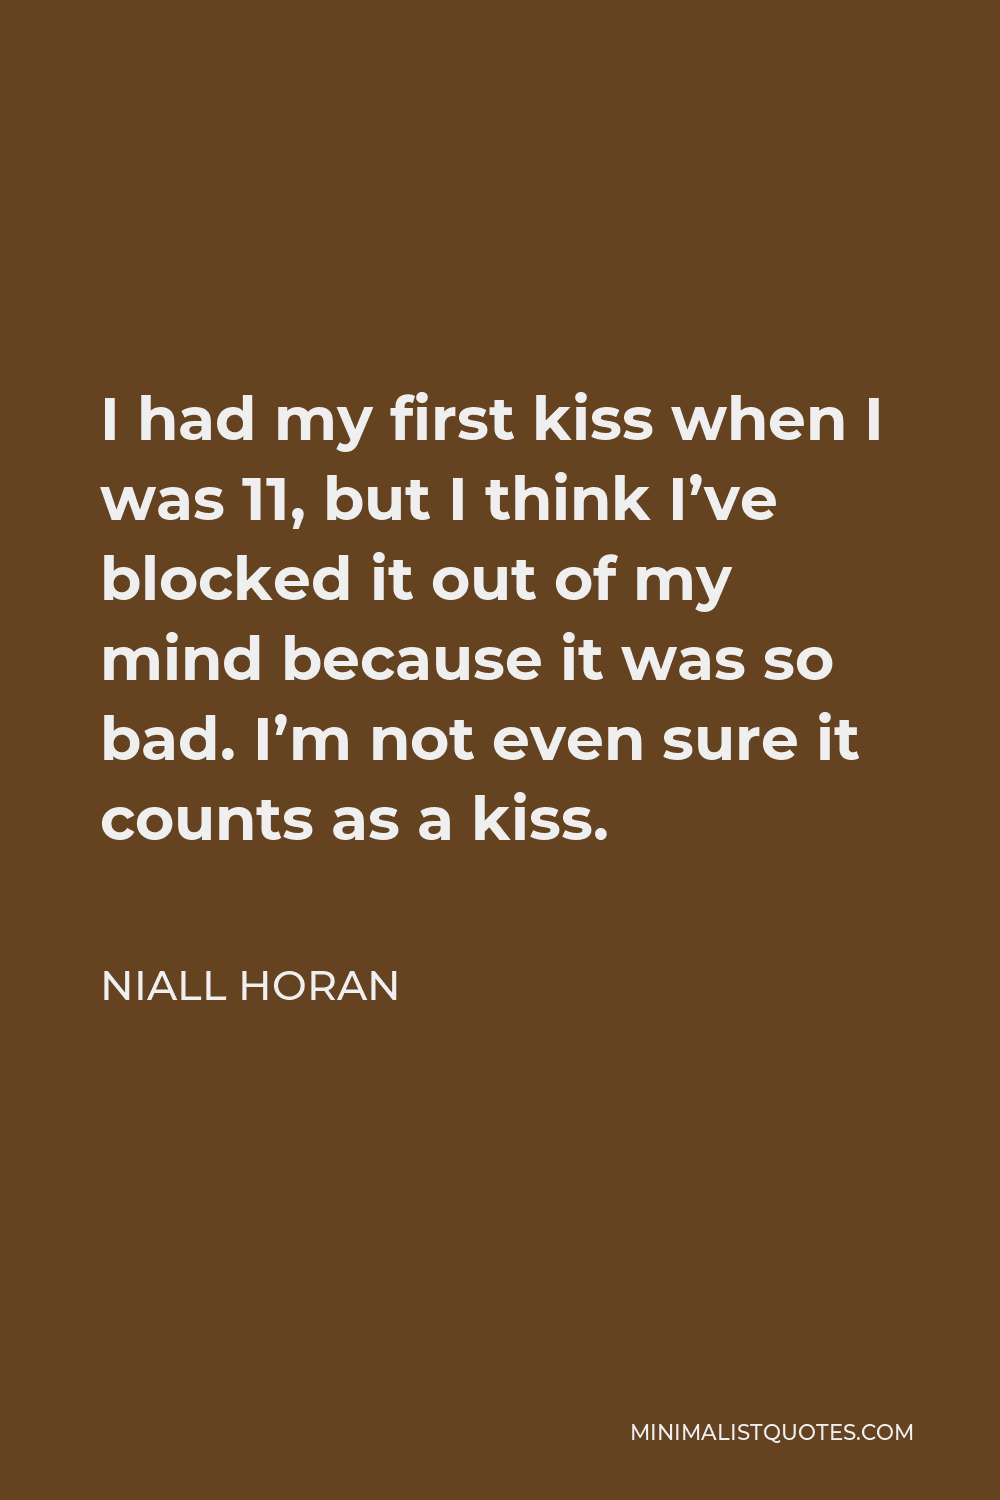 Niall Horan Quote - I had my first kiss when I was 11, but I think I’ve blocked it out of my mind because it was so bad. I’m not even sure it counts as a kiss.